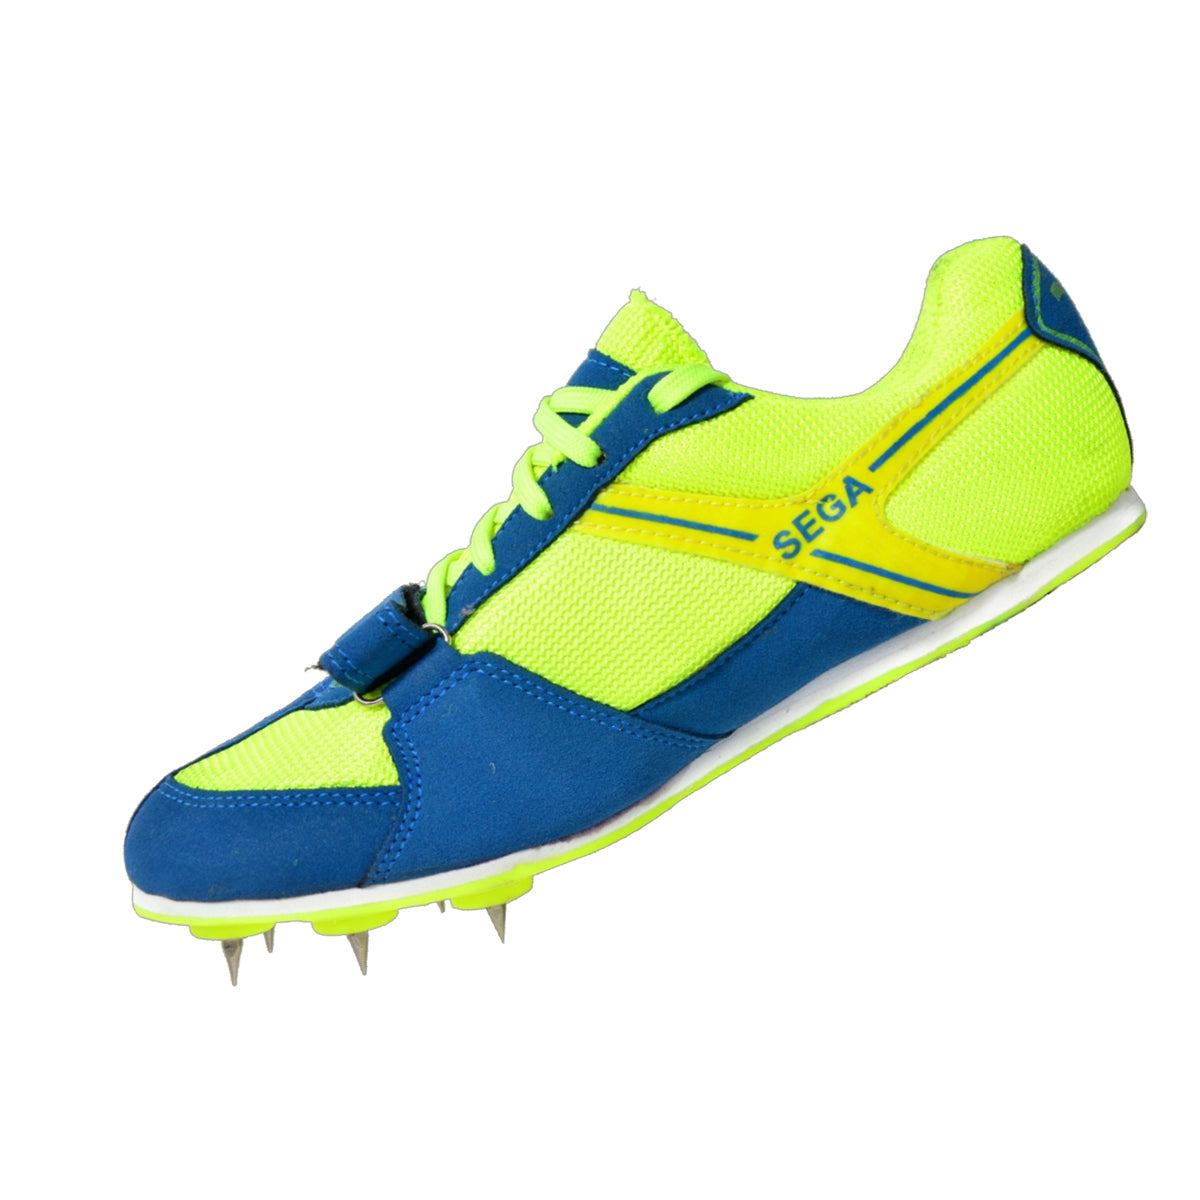 spike running shoes price